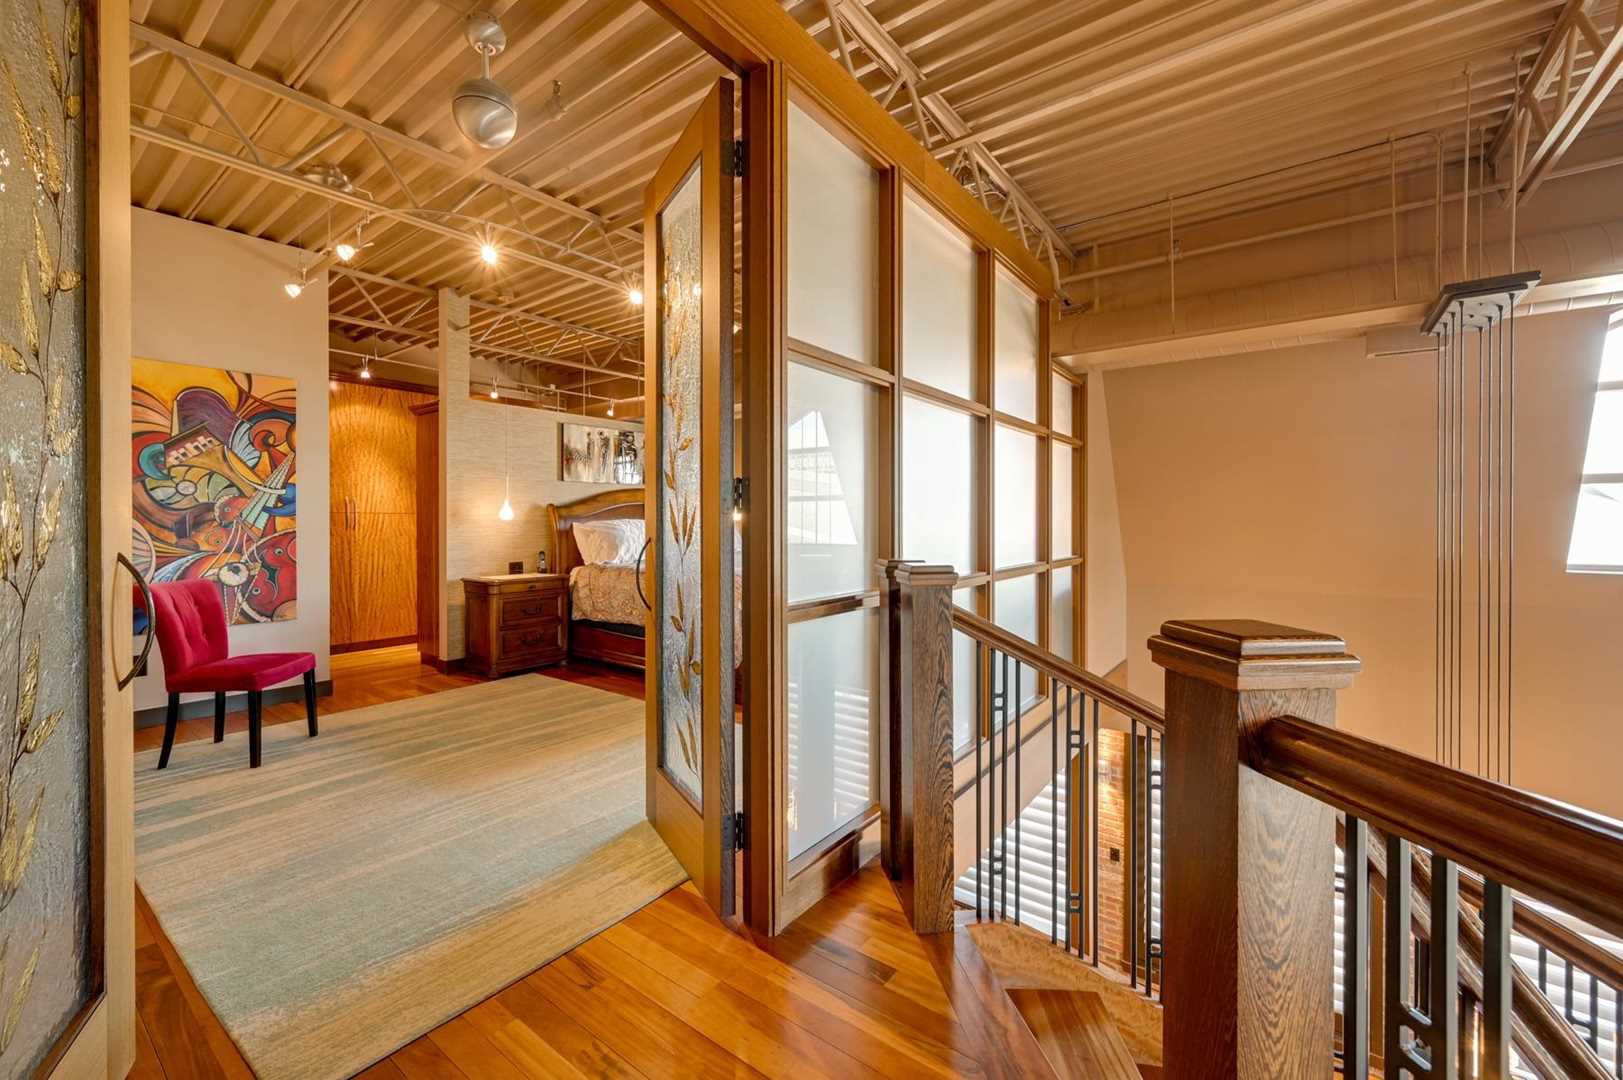 Interior entrance to loft bedroom with tiger wood floor, beige walls and open ceiling; glass doors open to bedroom on left; top of staircase on right